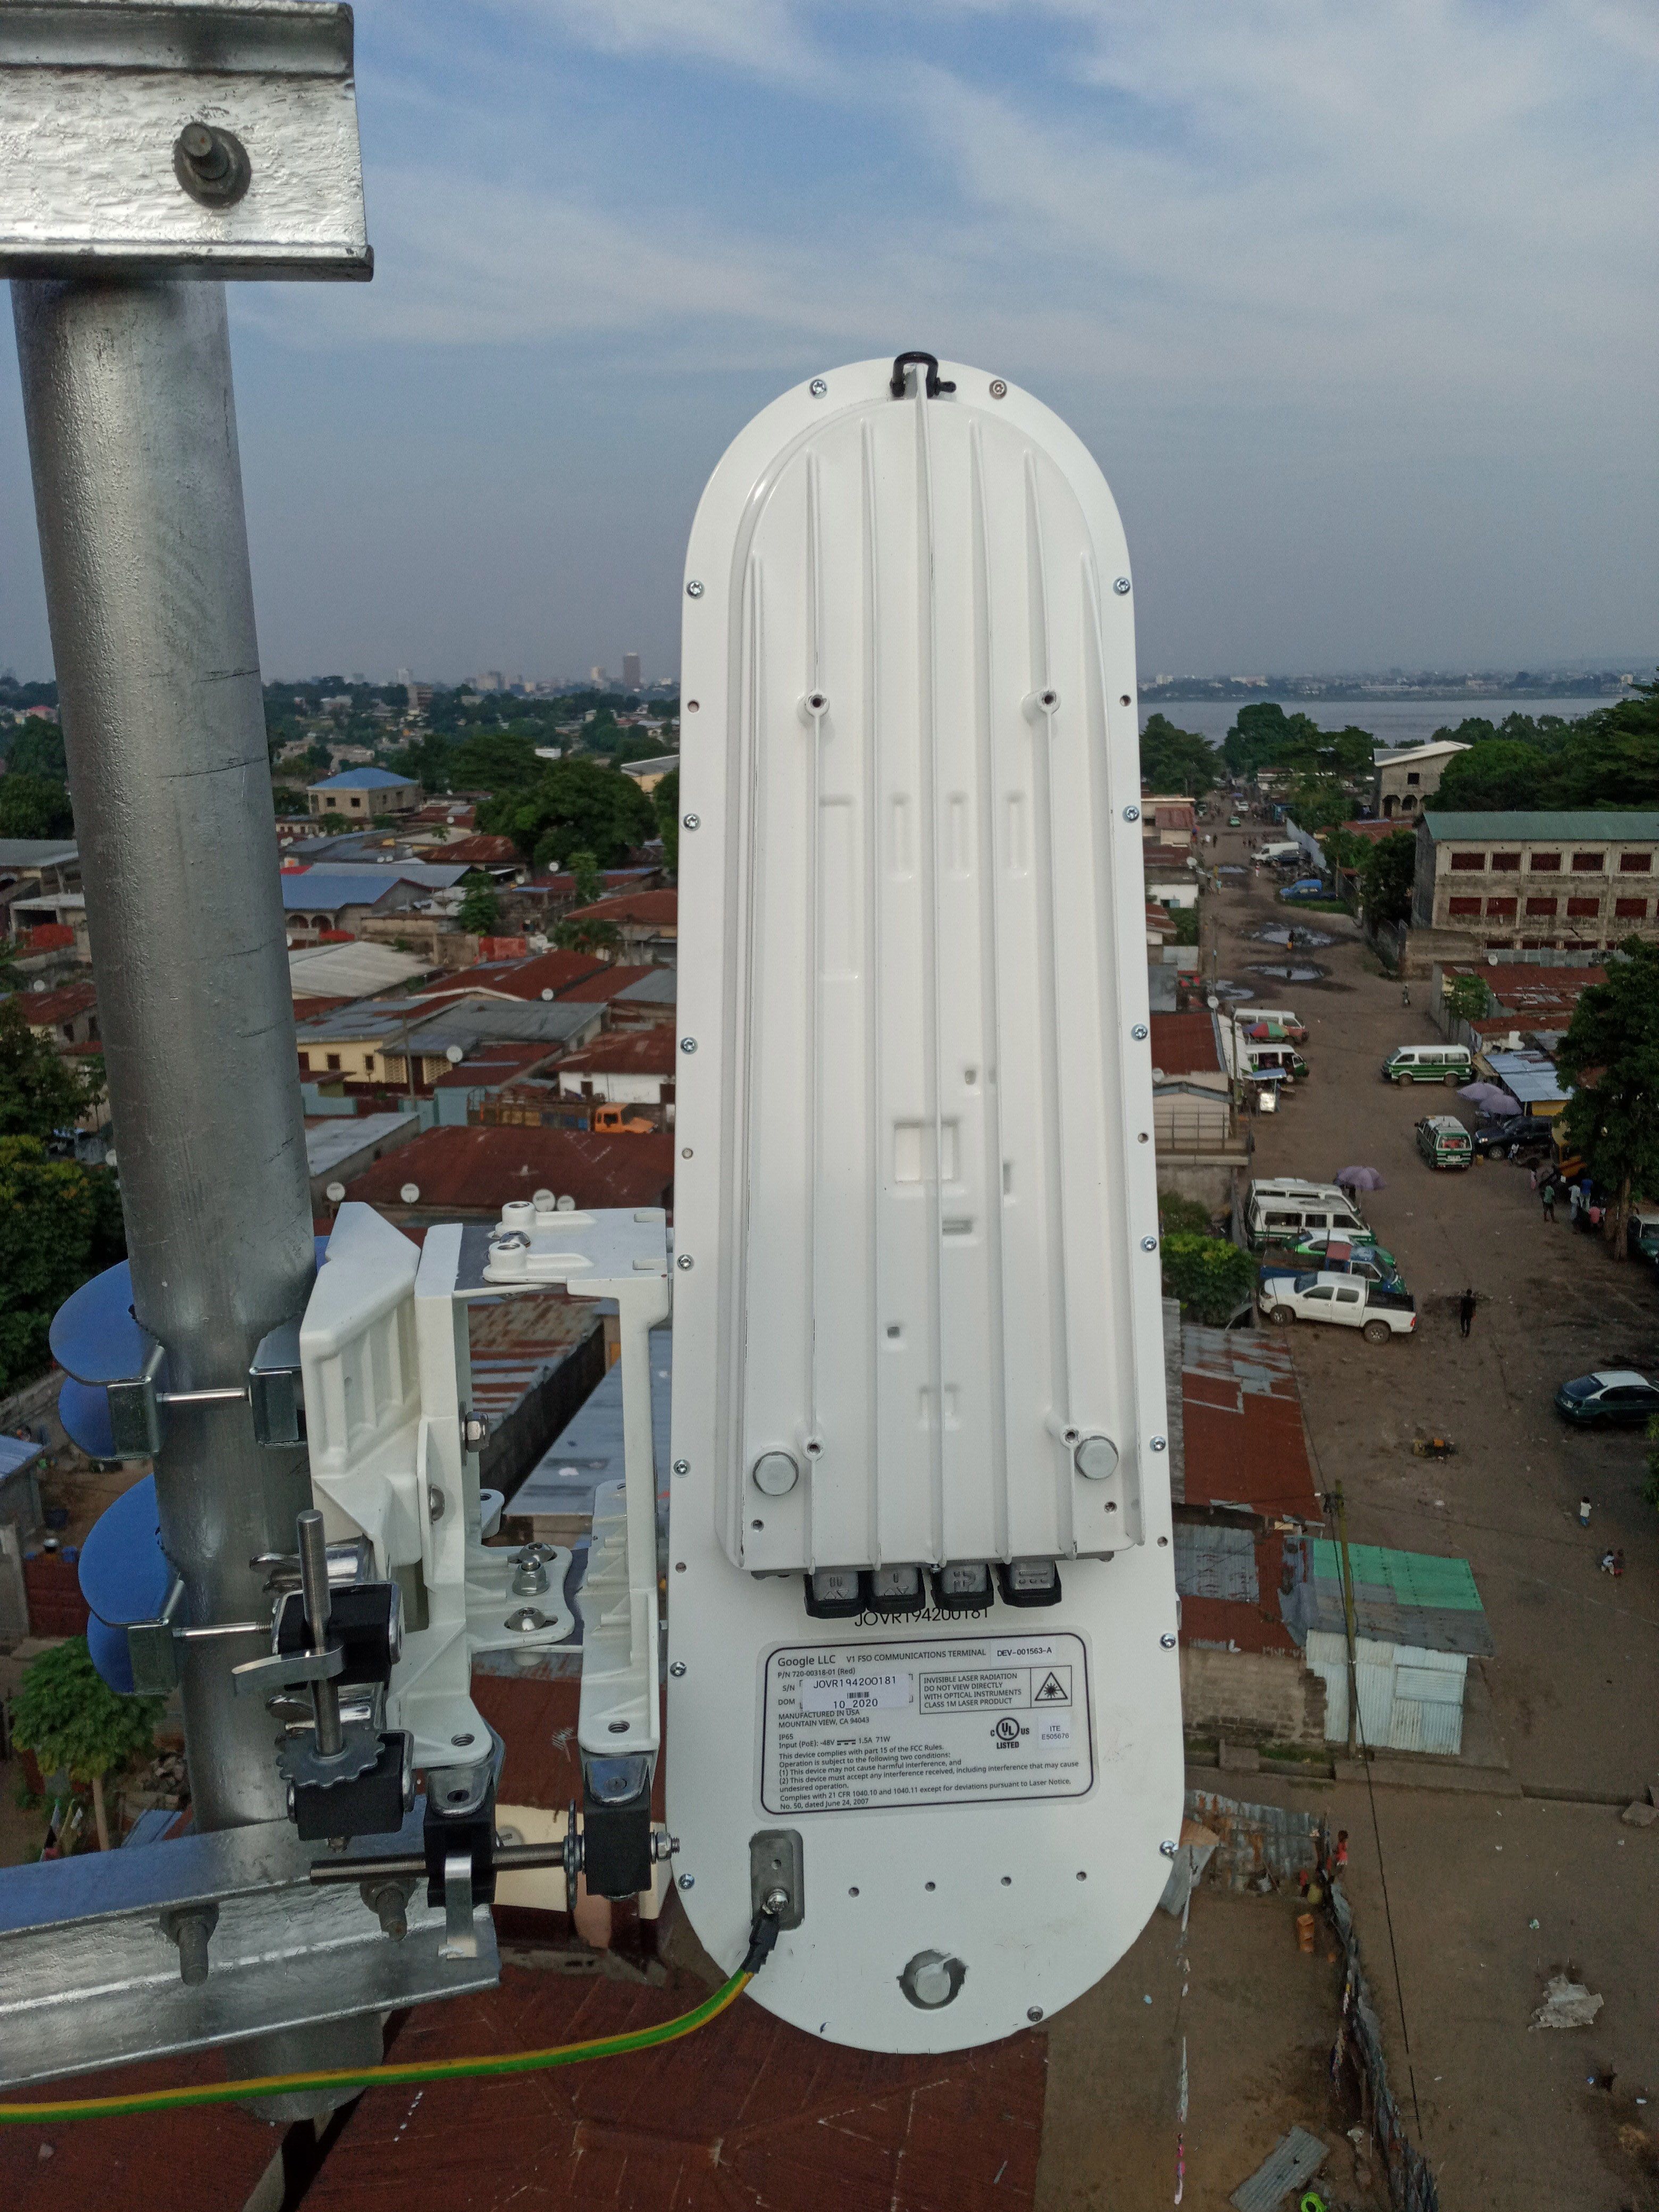 Liquid Intelligent Technologies Connects DRC and Congo Brazzaville With High-Speed Connectivity